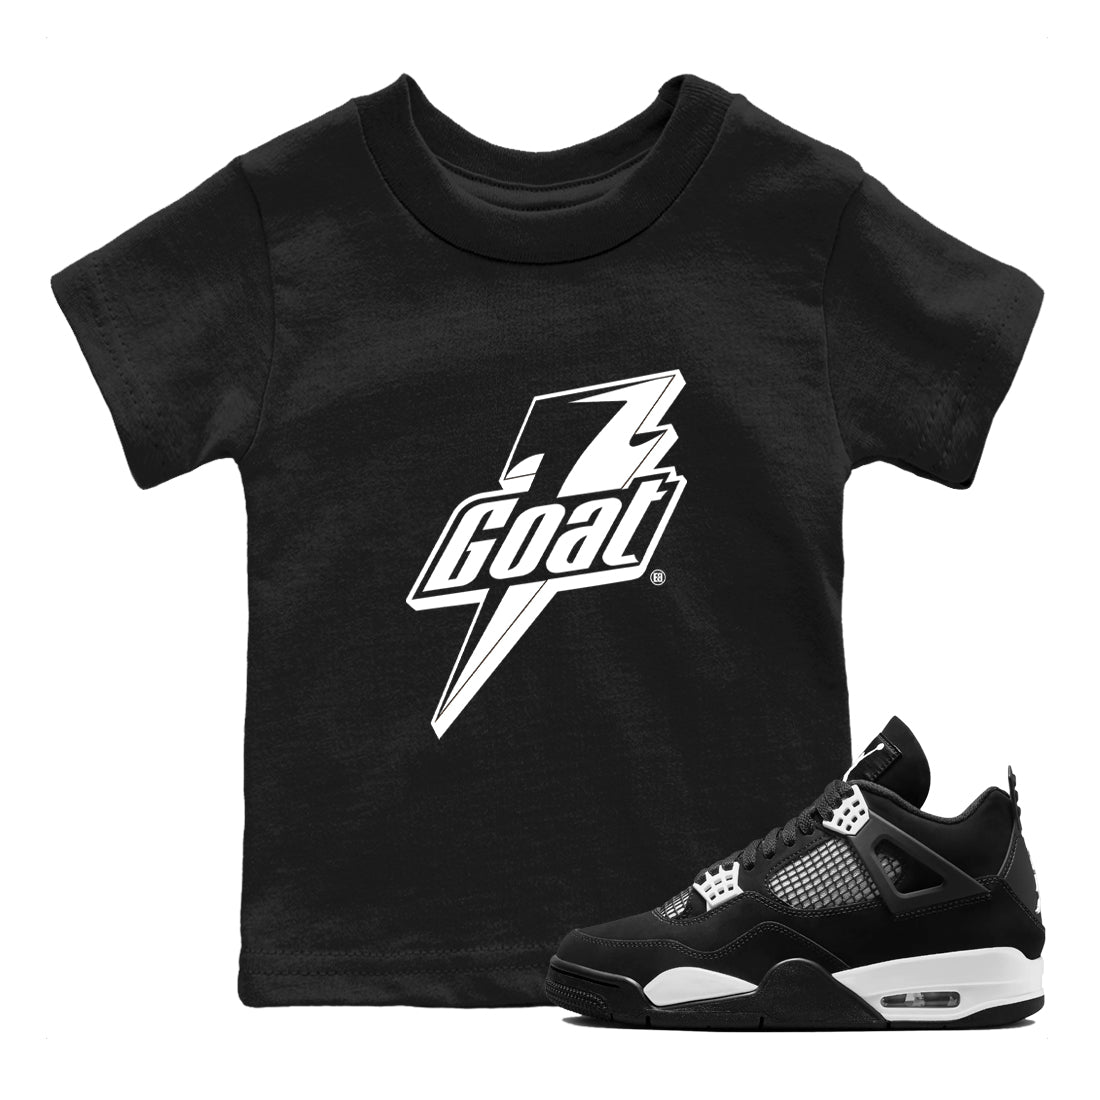 4s White Thunder shirts to match jordans Goat sneaker match tees Air Jordan 4 Retro White Thunder SNRT Sneaker Tees streetwear brand Baby and Youth Black 1 cotton tee